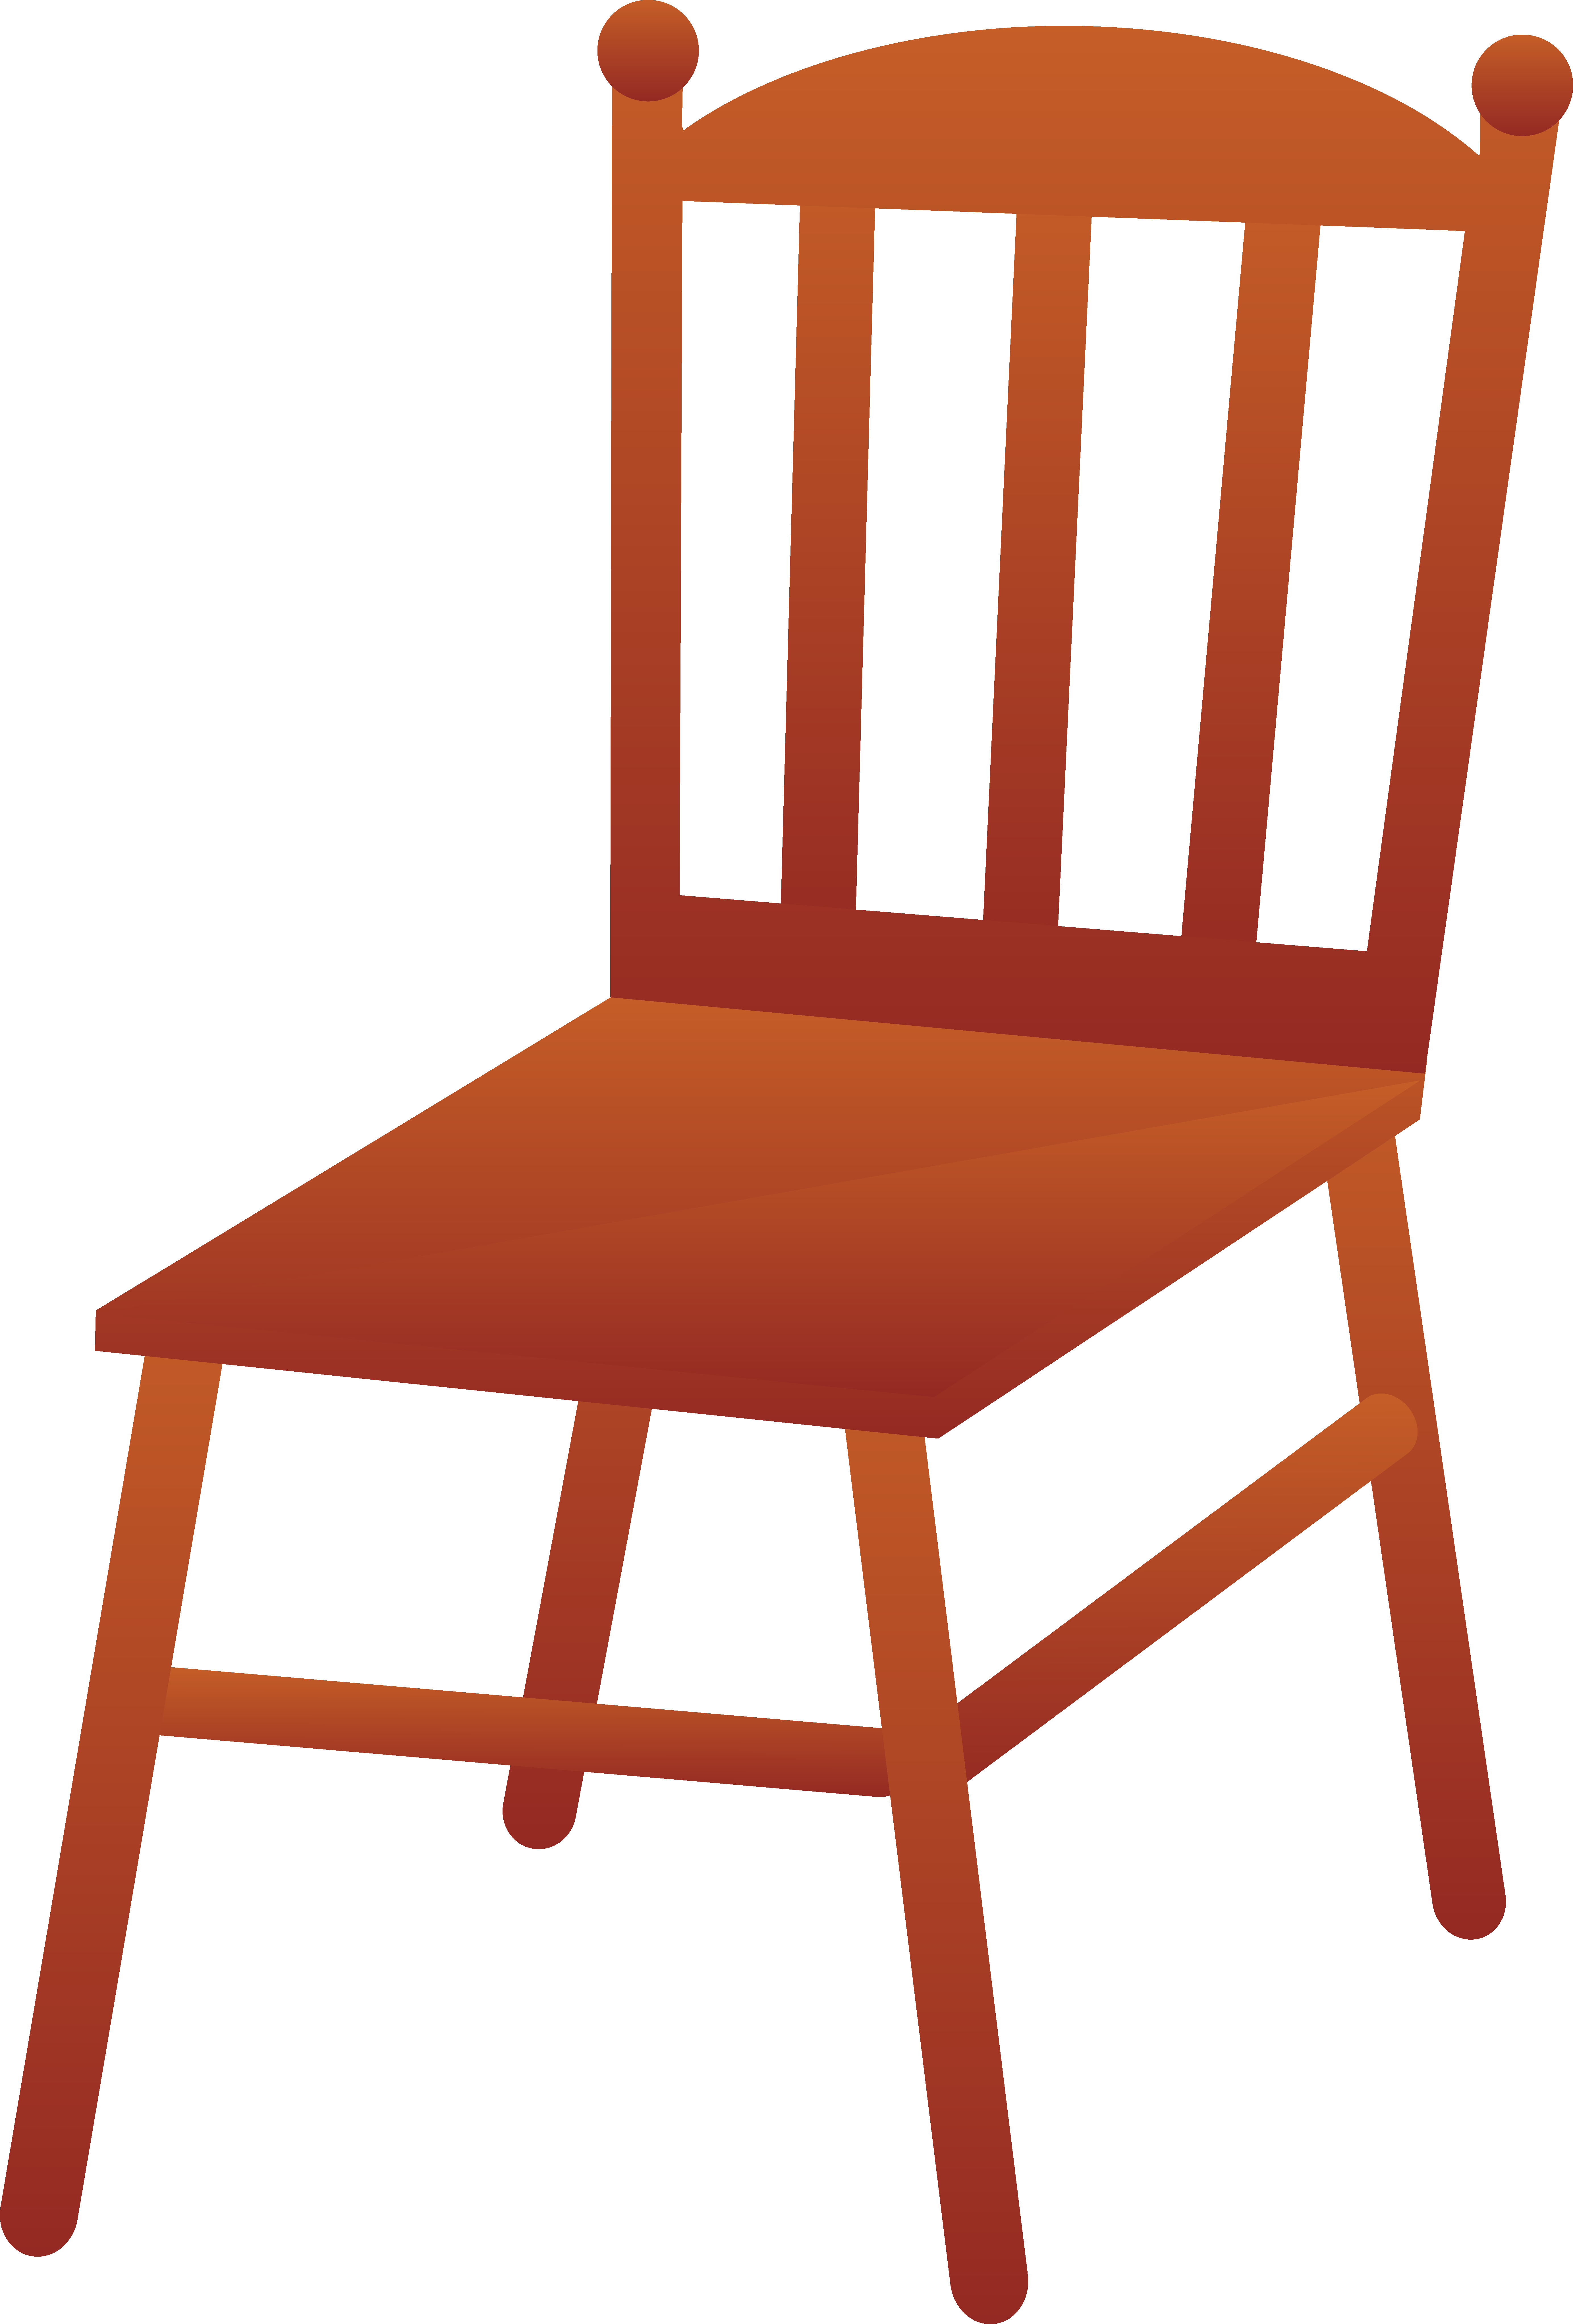 Clipart music chair. Brown wooden free clip